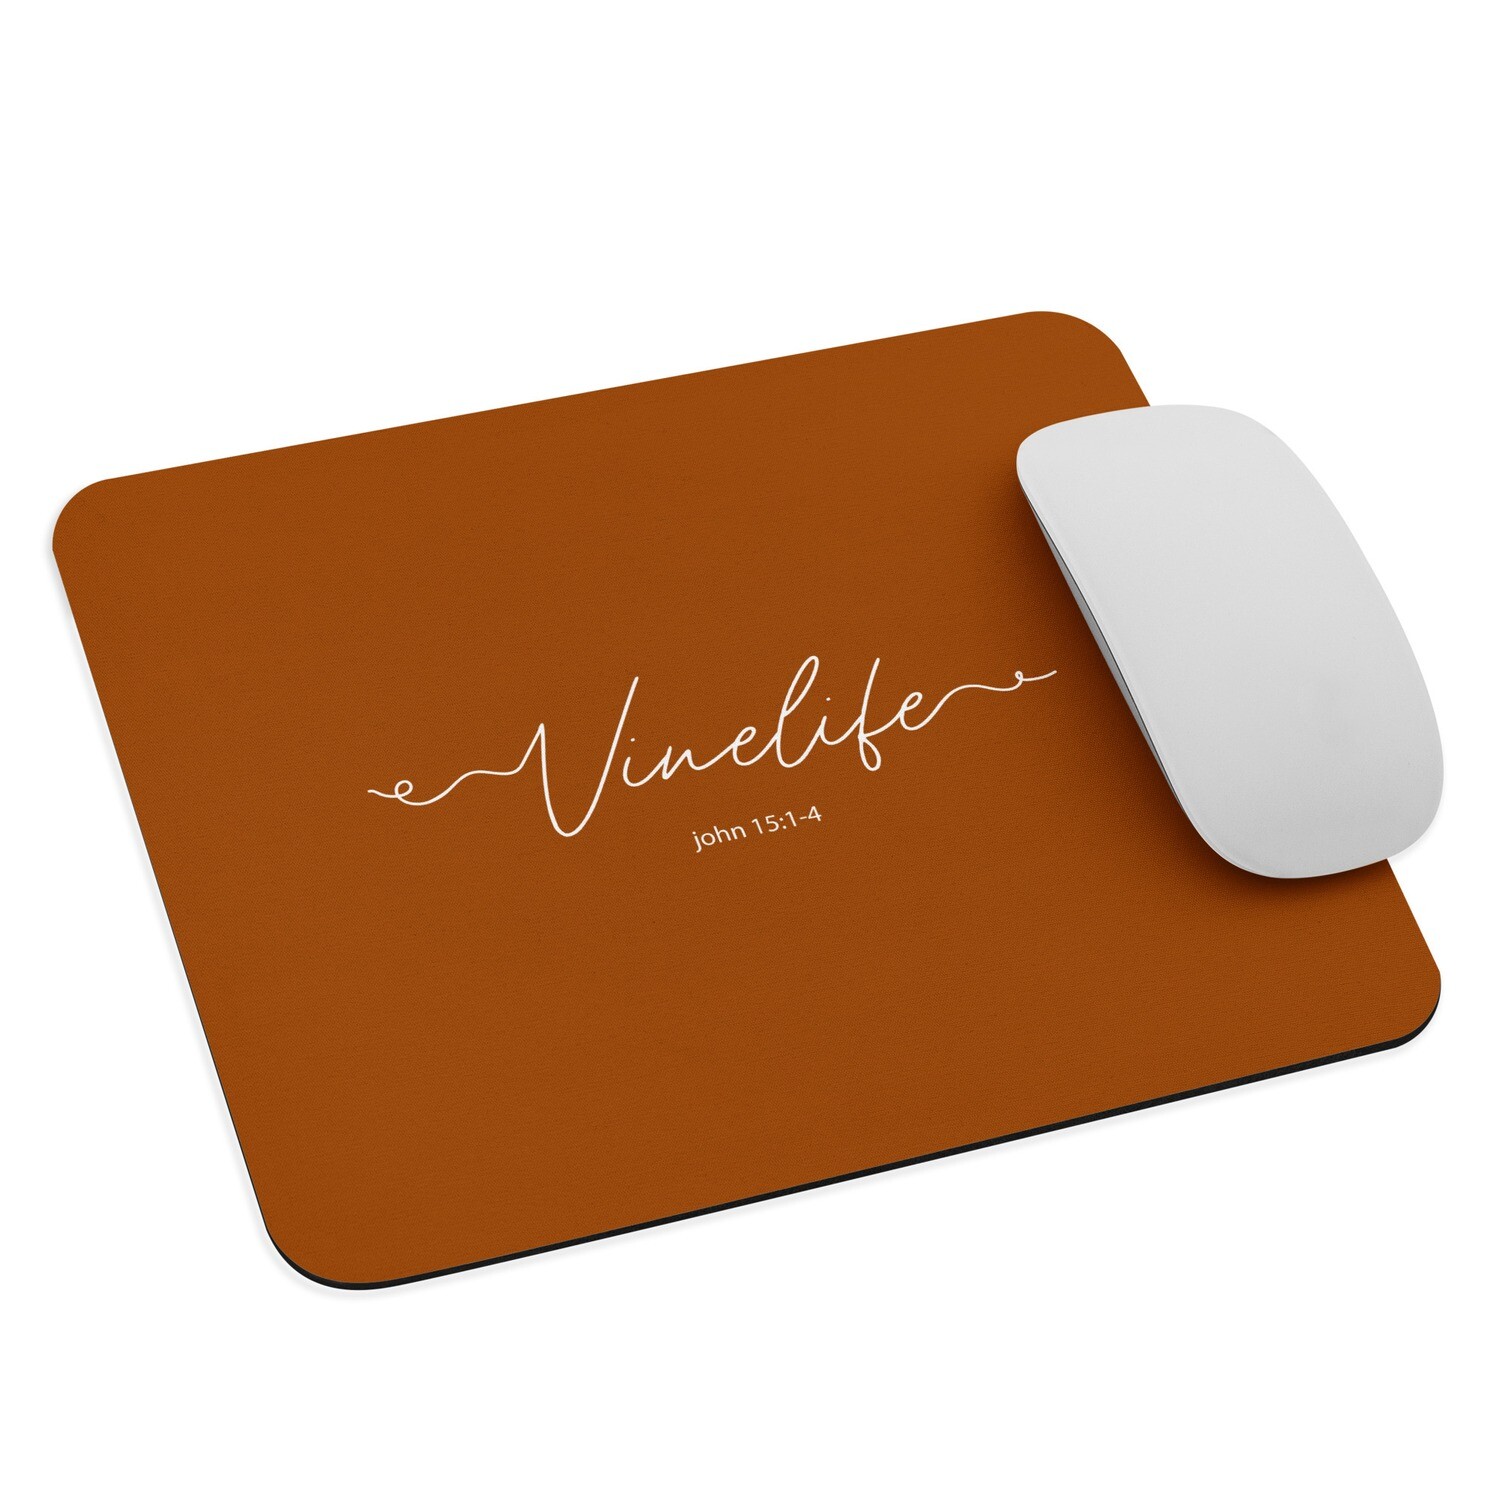 Vinelife - mouse pad